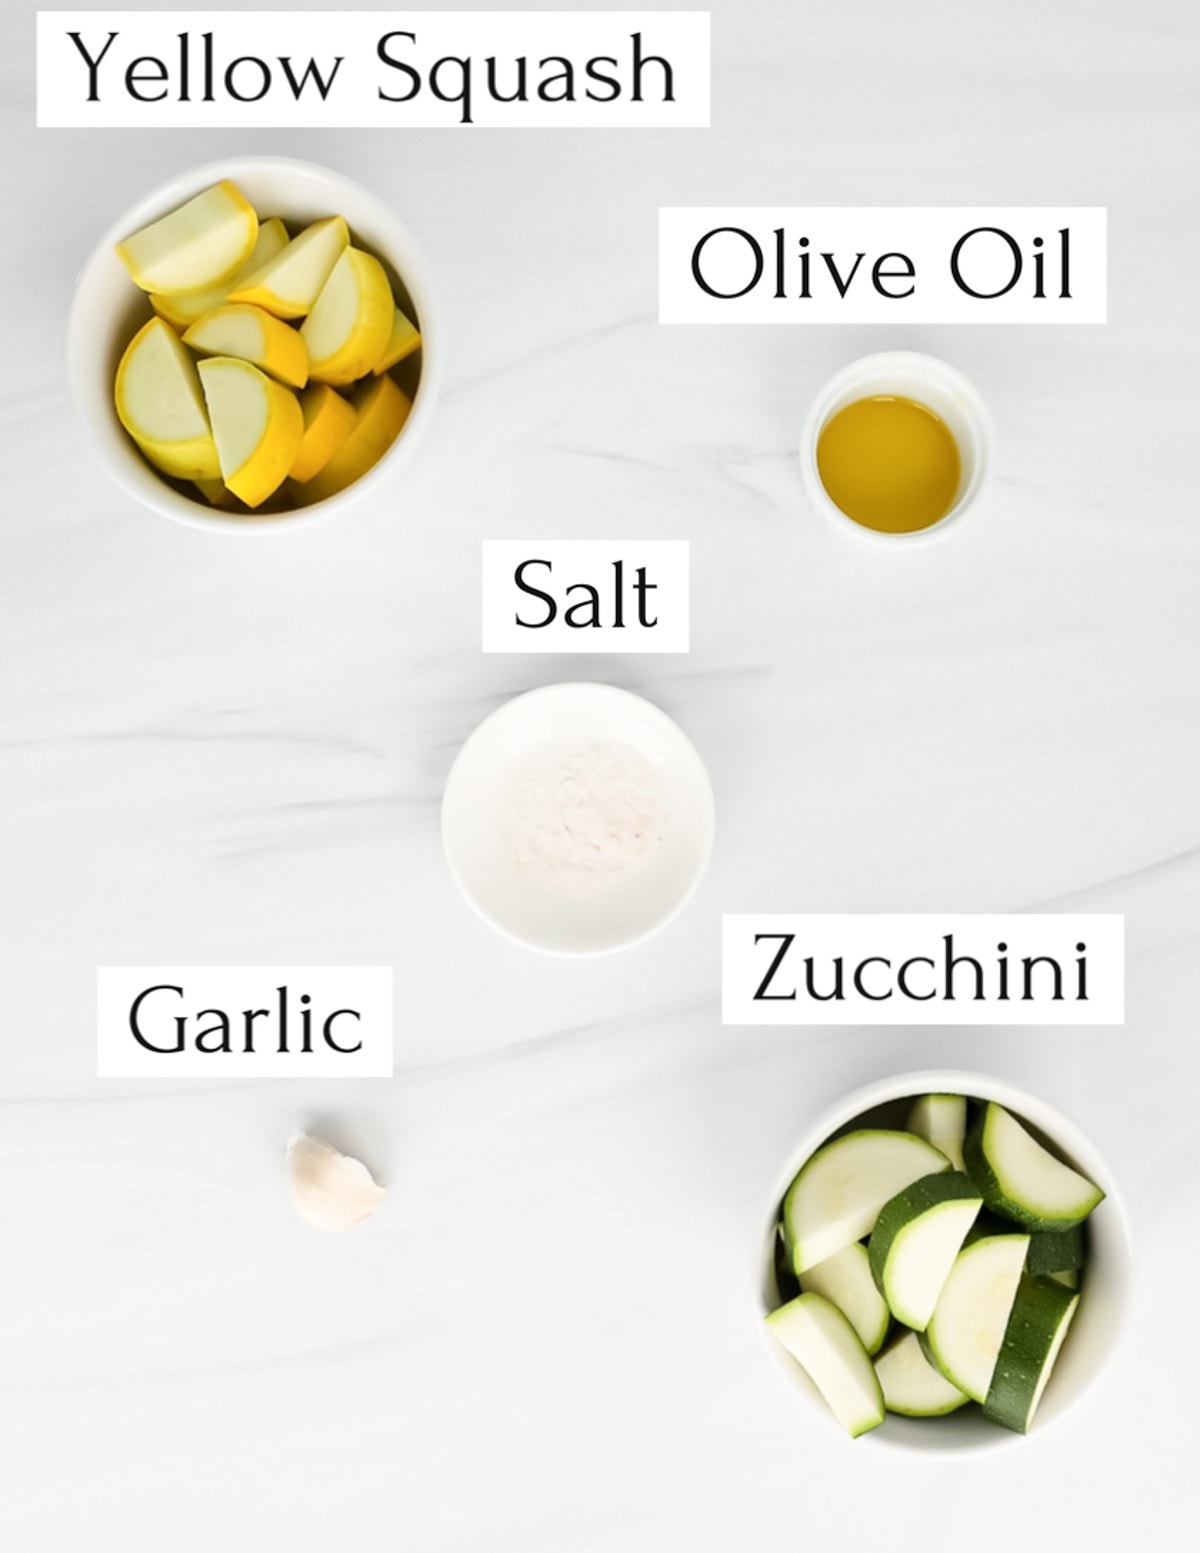 Labeled ingredients in small white bowls including: yellow squash, olive oil, salt, garlic, zucchini.